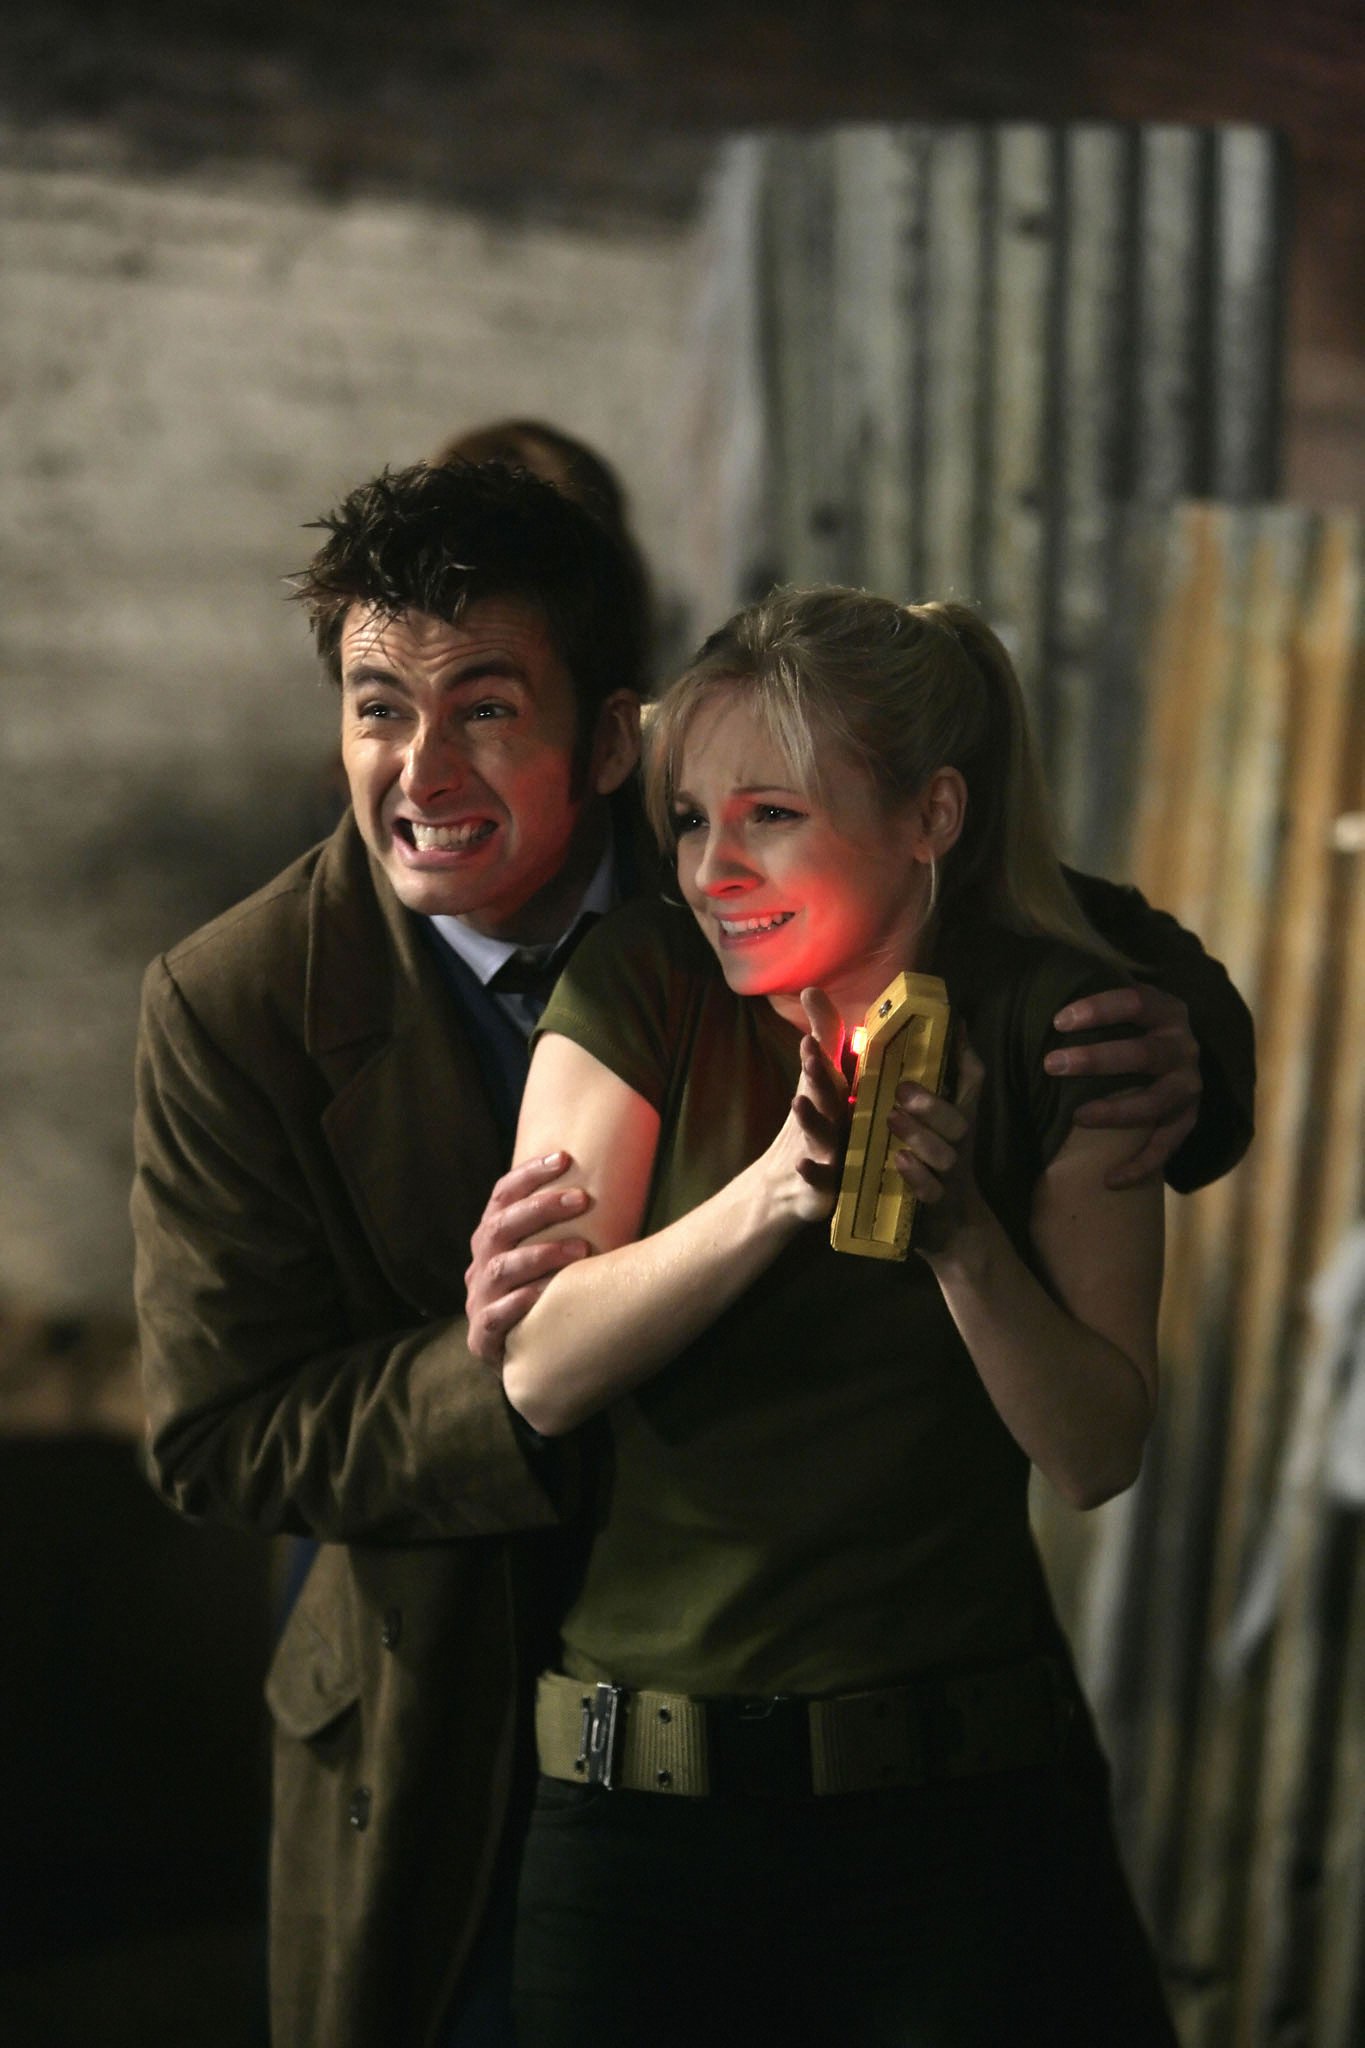 #15 David Tennant and Georgia Moffett met on the set of Doctor Who Season 4 when she had a guest appearance in one of the episodes. They got married in 2012 and had their first child in 2011. 